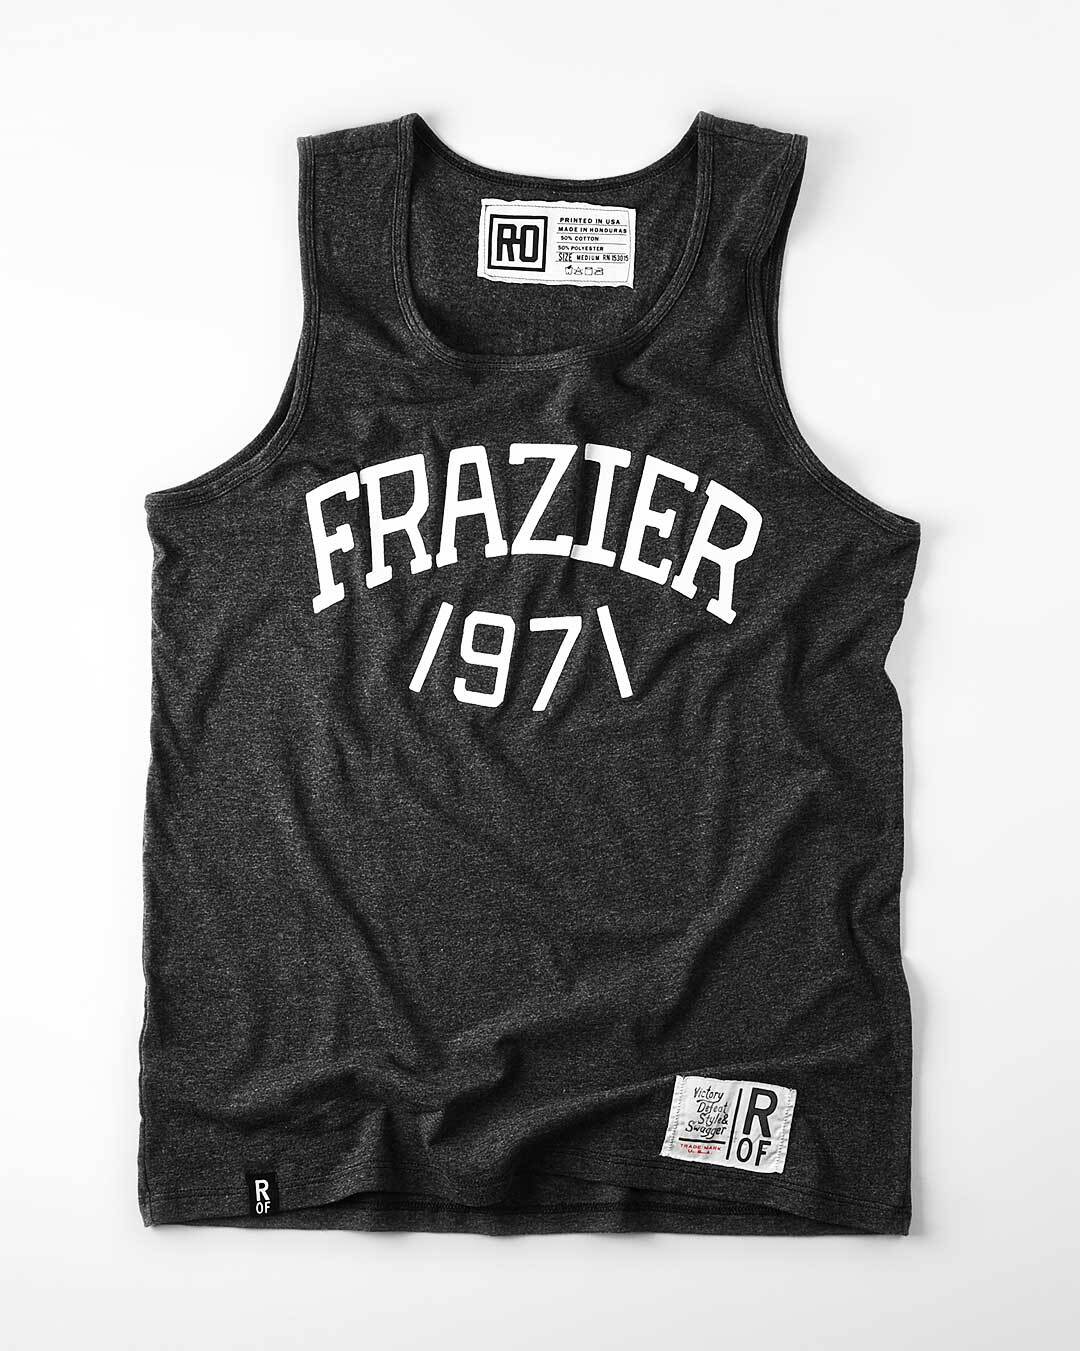 Frazier 1971 Black Tank - Roots of Fight